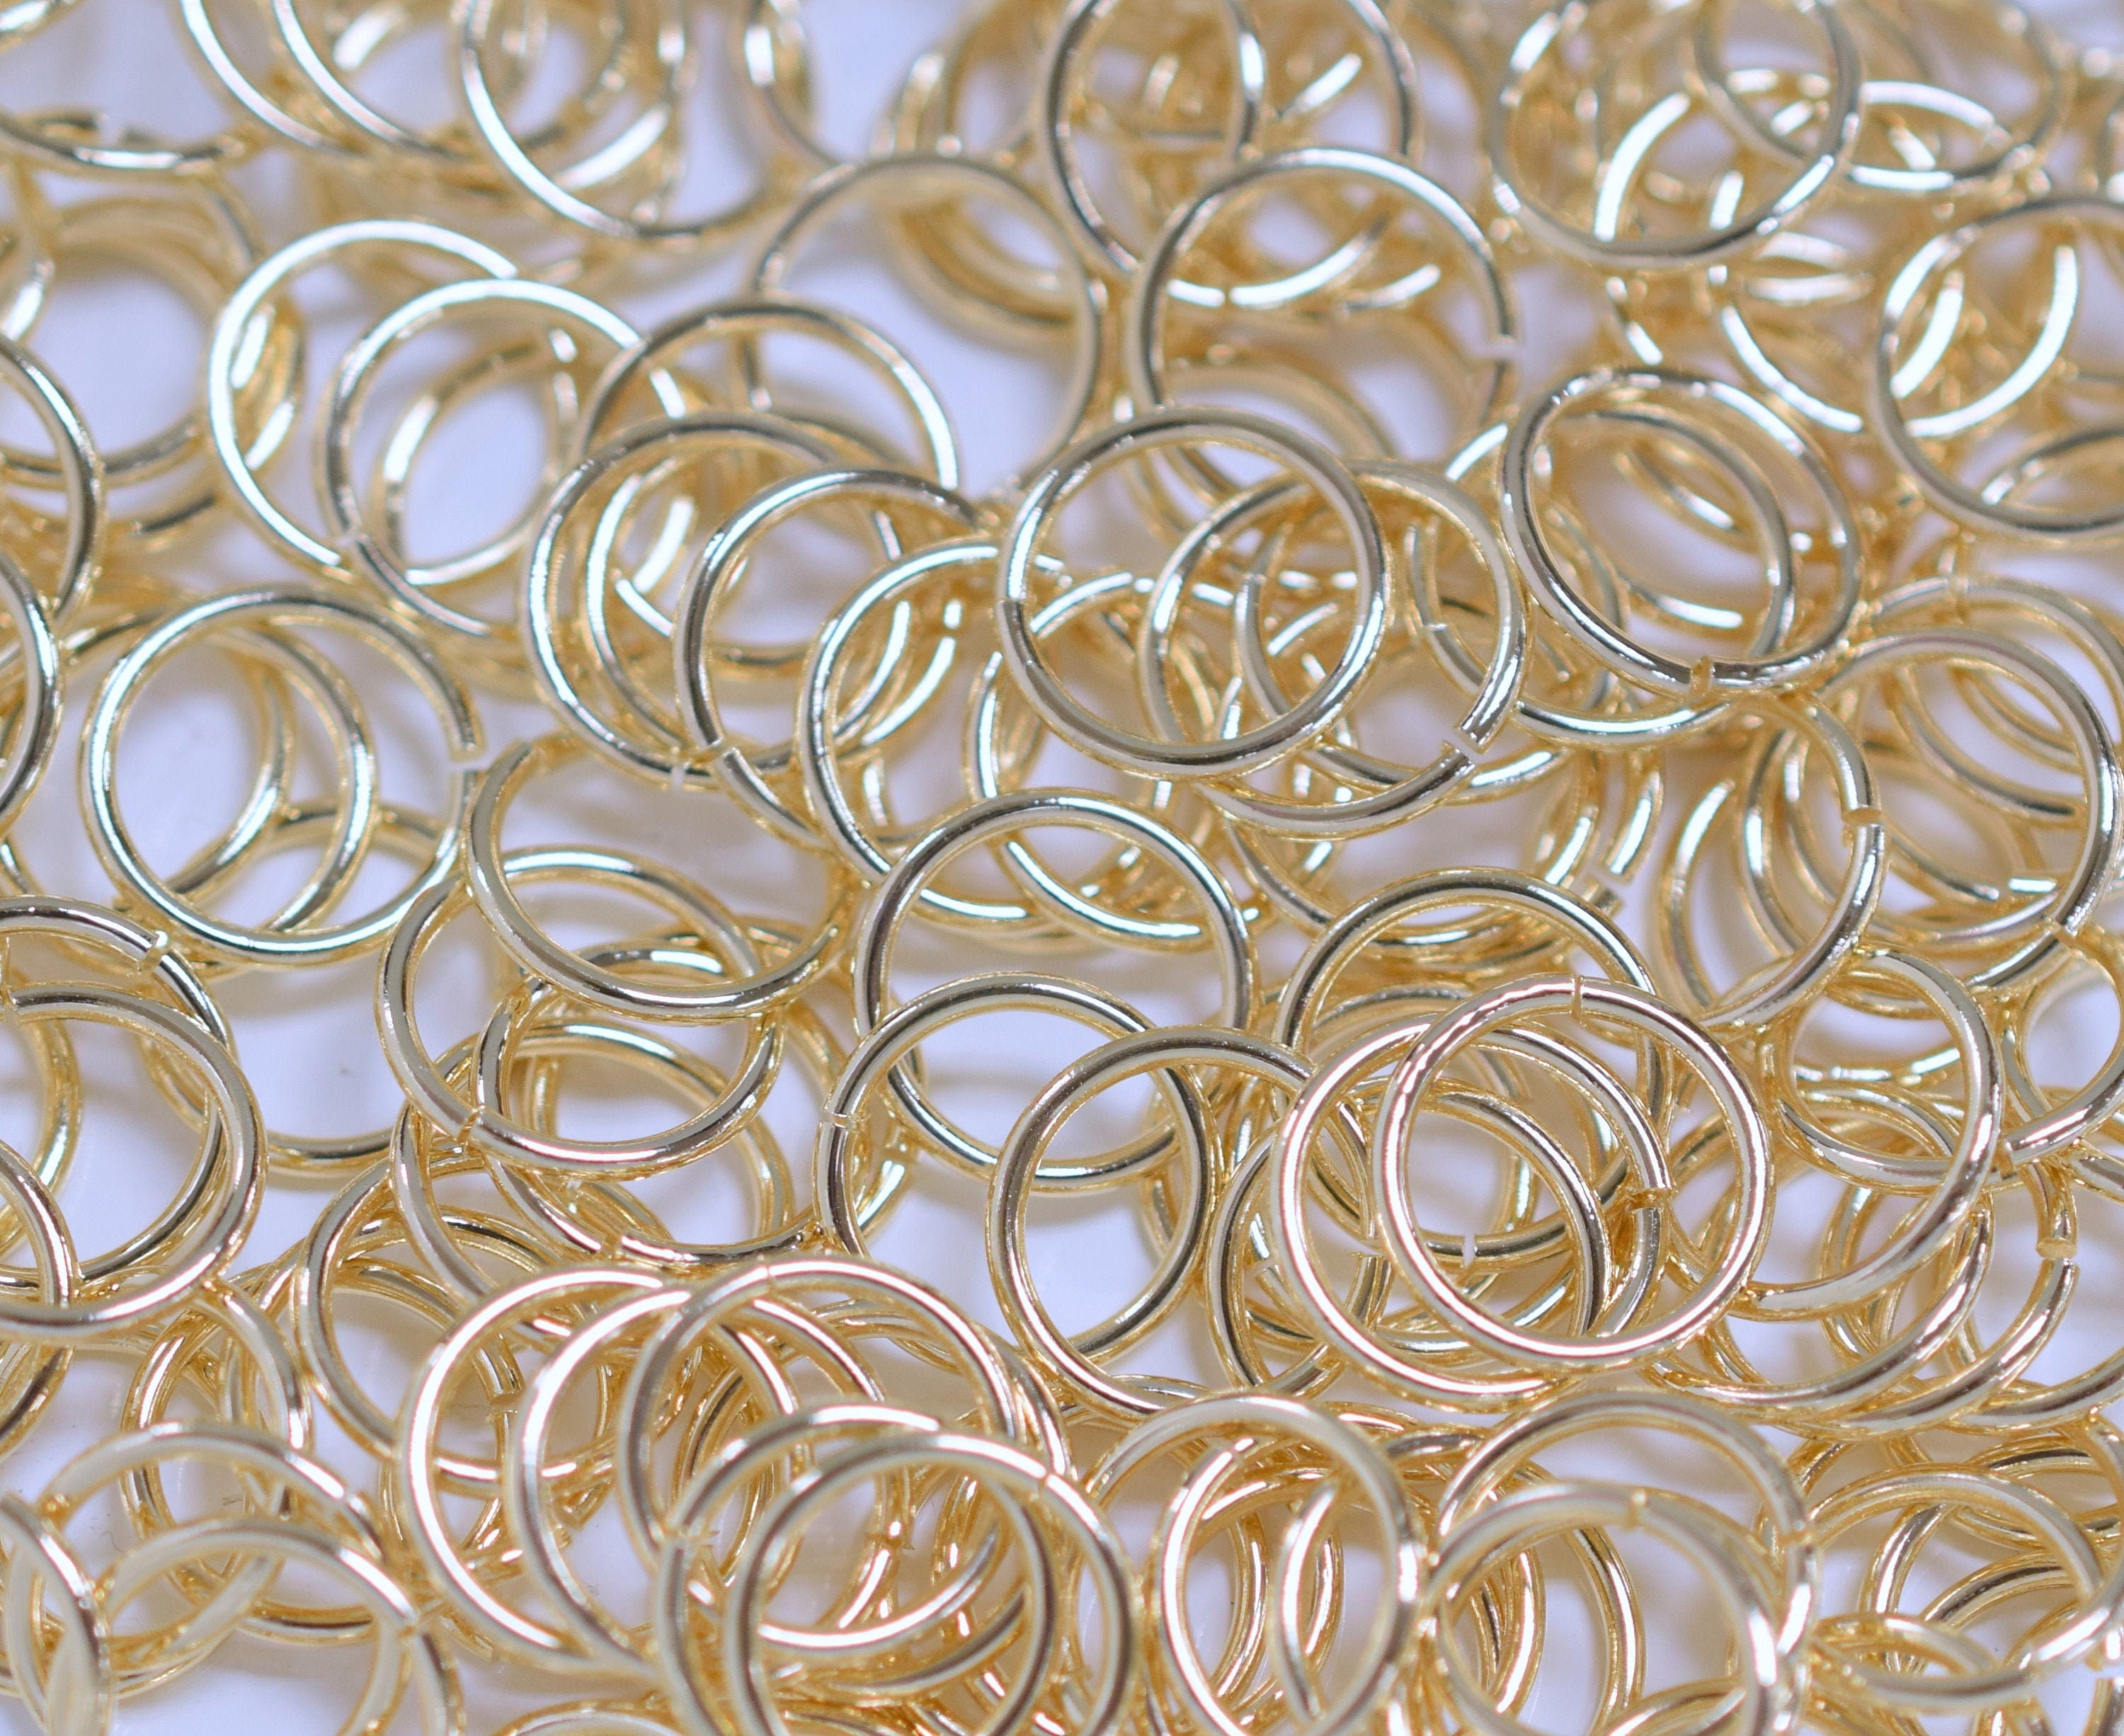 200 Gold Jump Rings for Jewelry Making, O Rings, Gold Plated Jumprings for  Chain Mail Jewelry or Chainmaille Connectors 18 Gauge AWG 6mm 